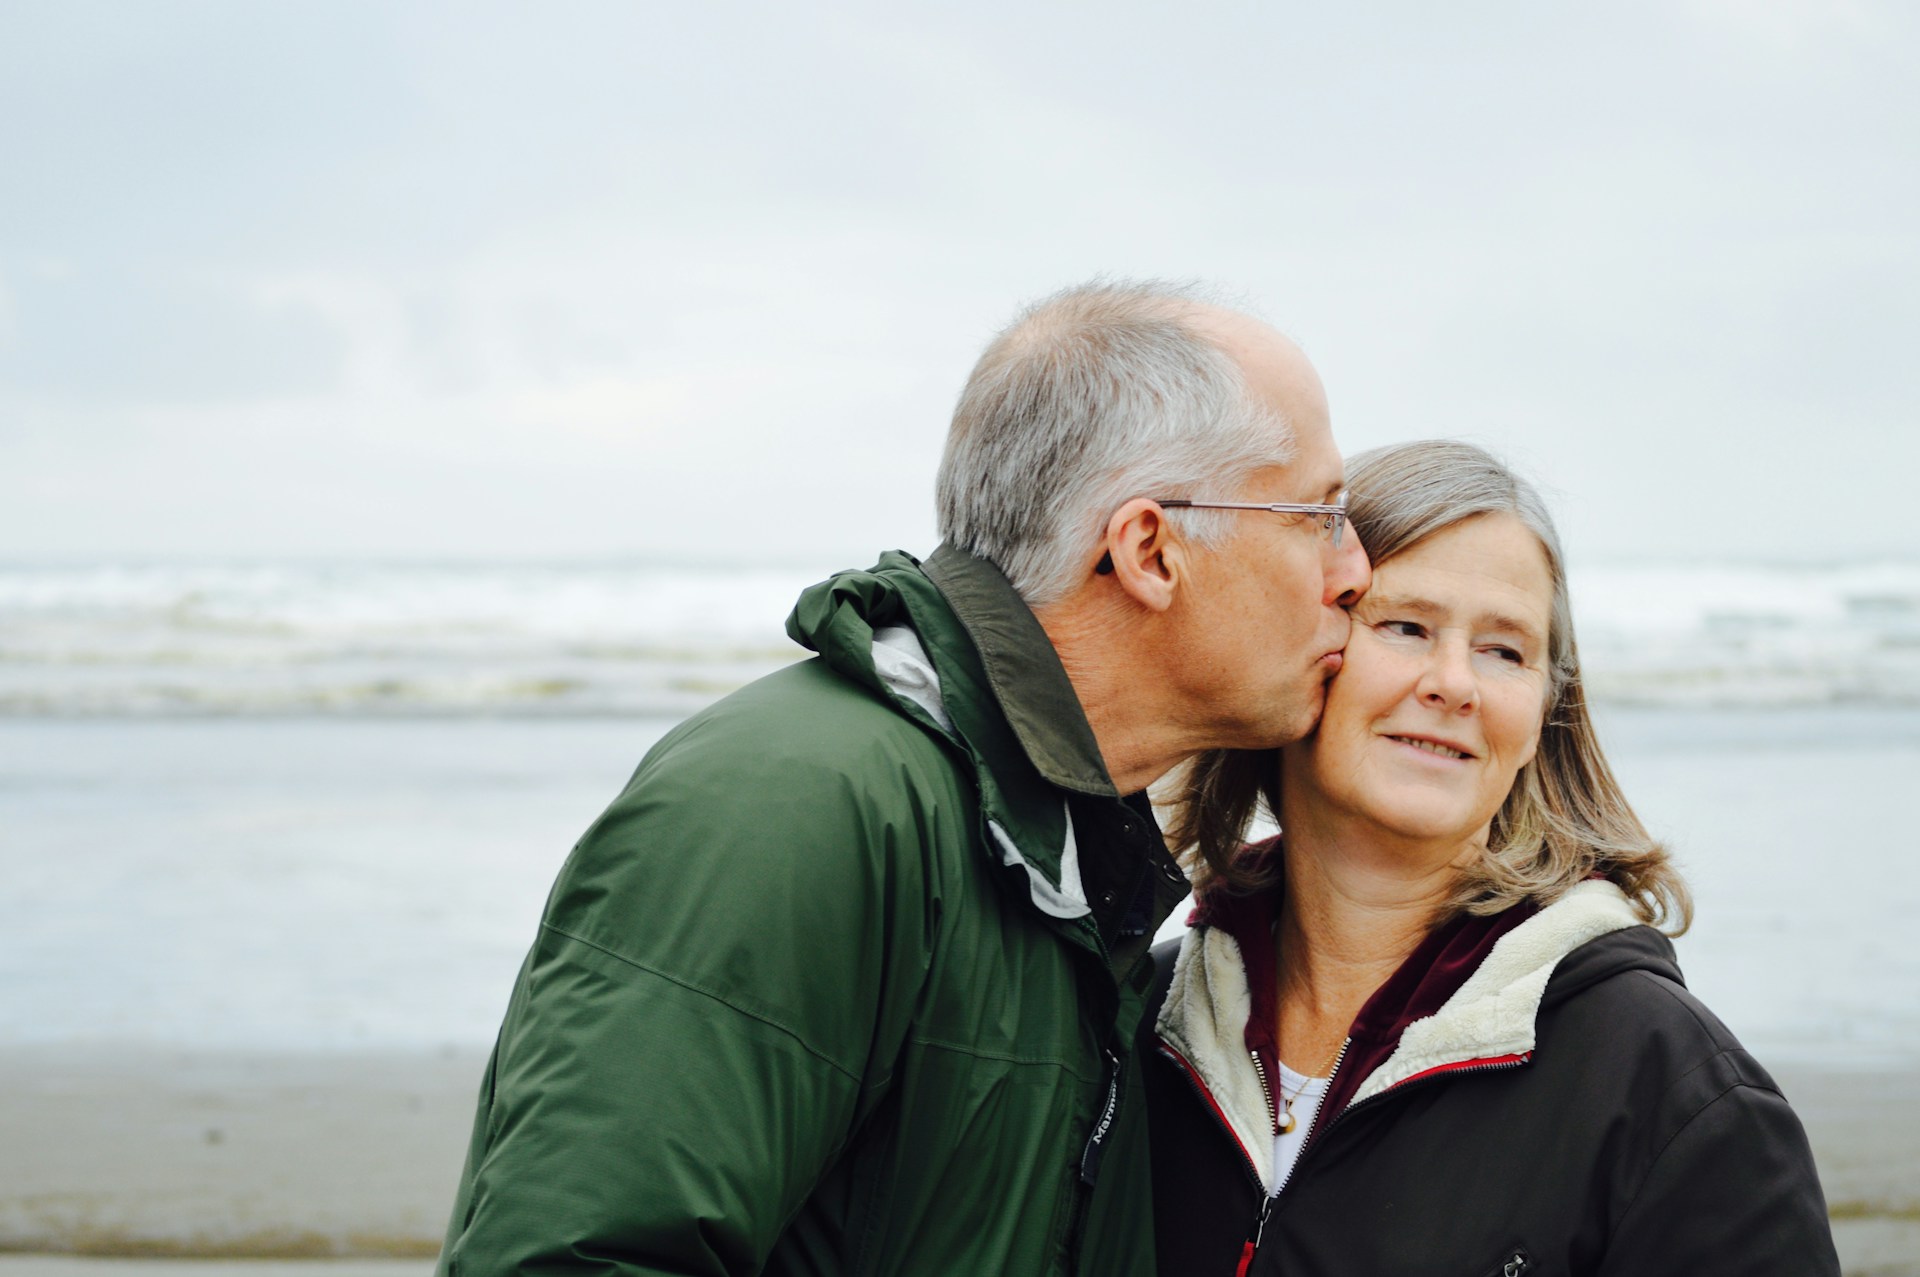 Older people and intimacy. Photo of a grey haried man kissing his partner on a beach.